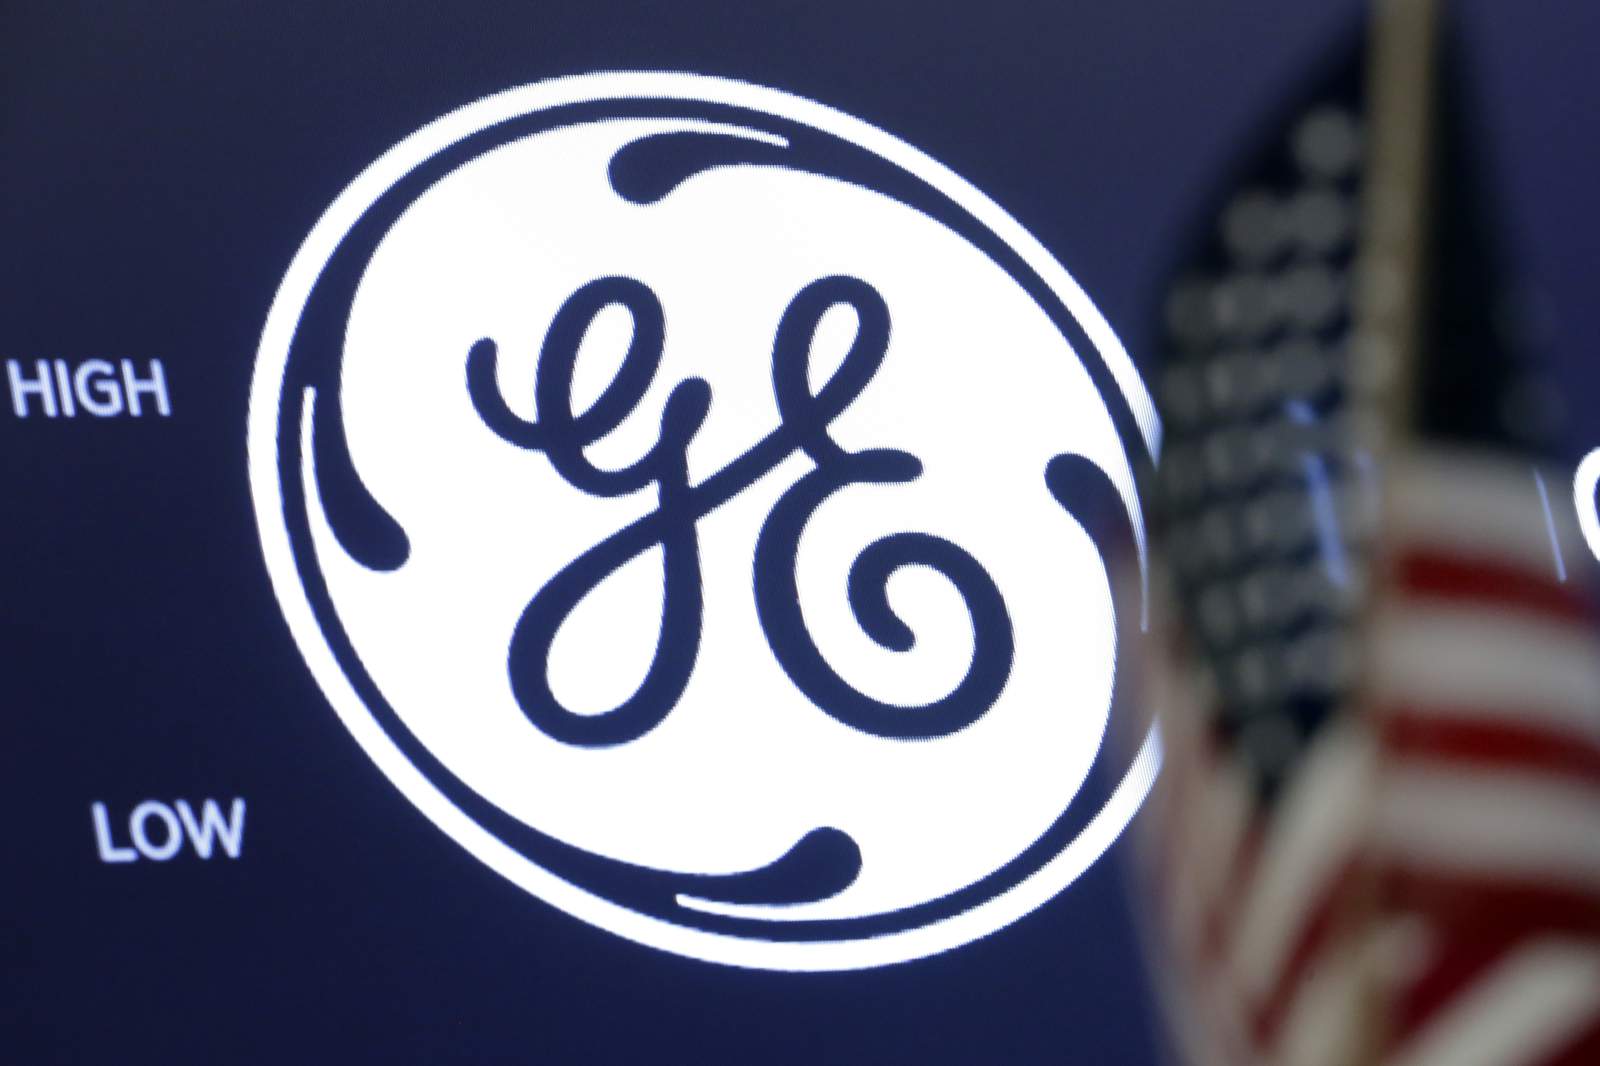 GE, AerCap join air leasing businesses in $30 billion deal